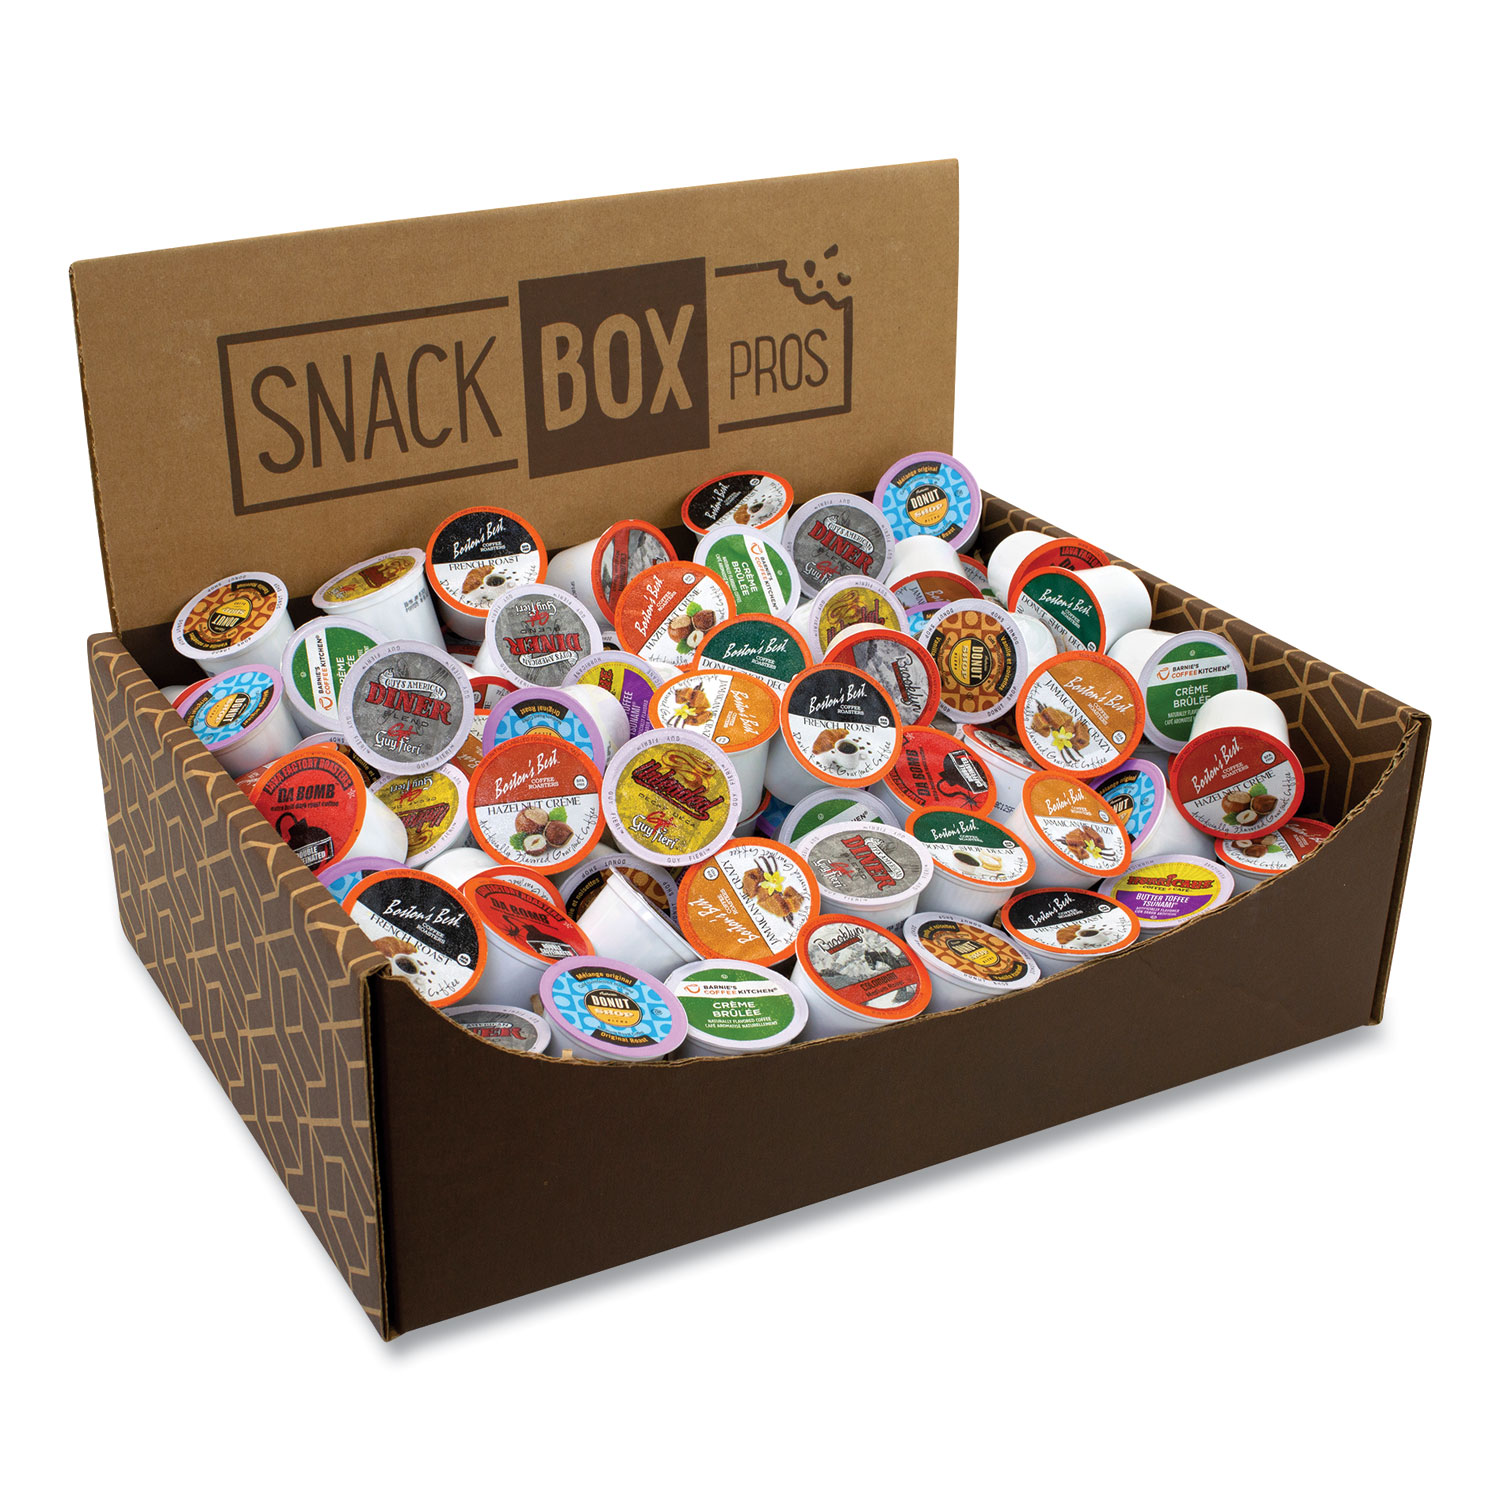  Snack Box Pros 70000034 Large K-Cup Assortment, 84/Box, Free Delivery in 1-4 Business Days (GRR70000034) 